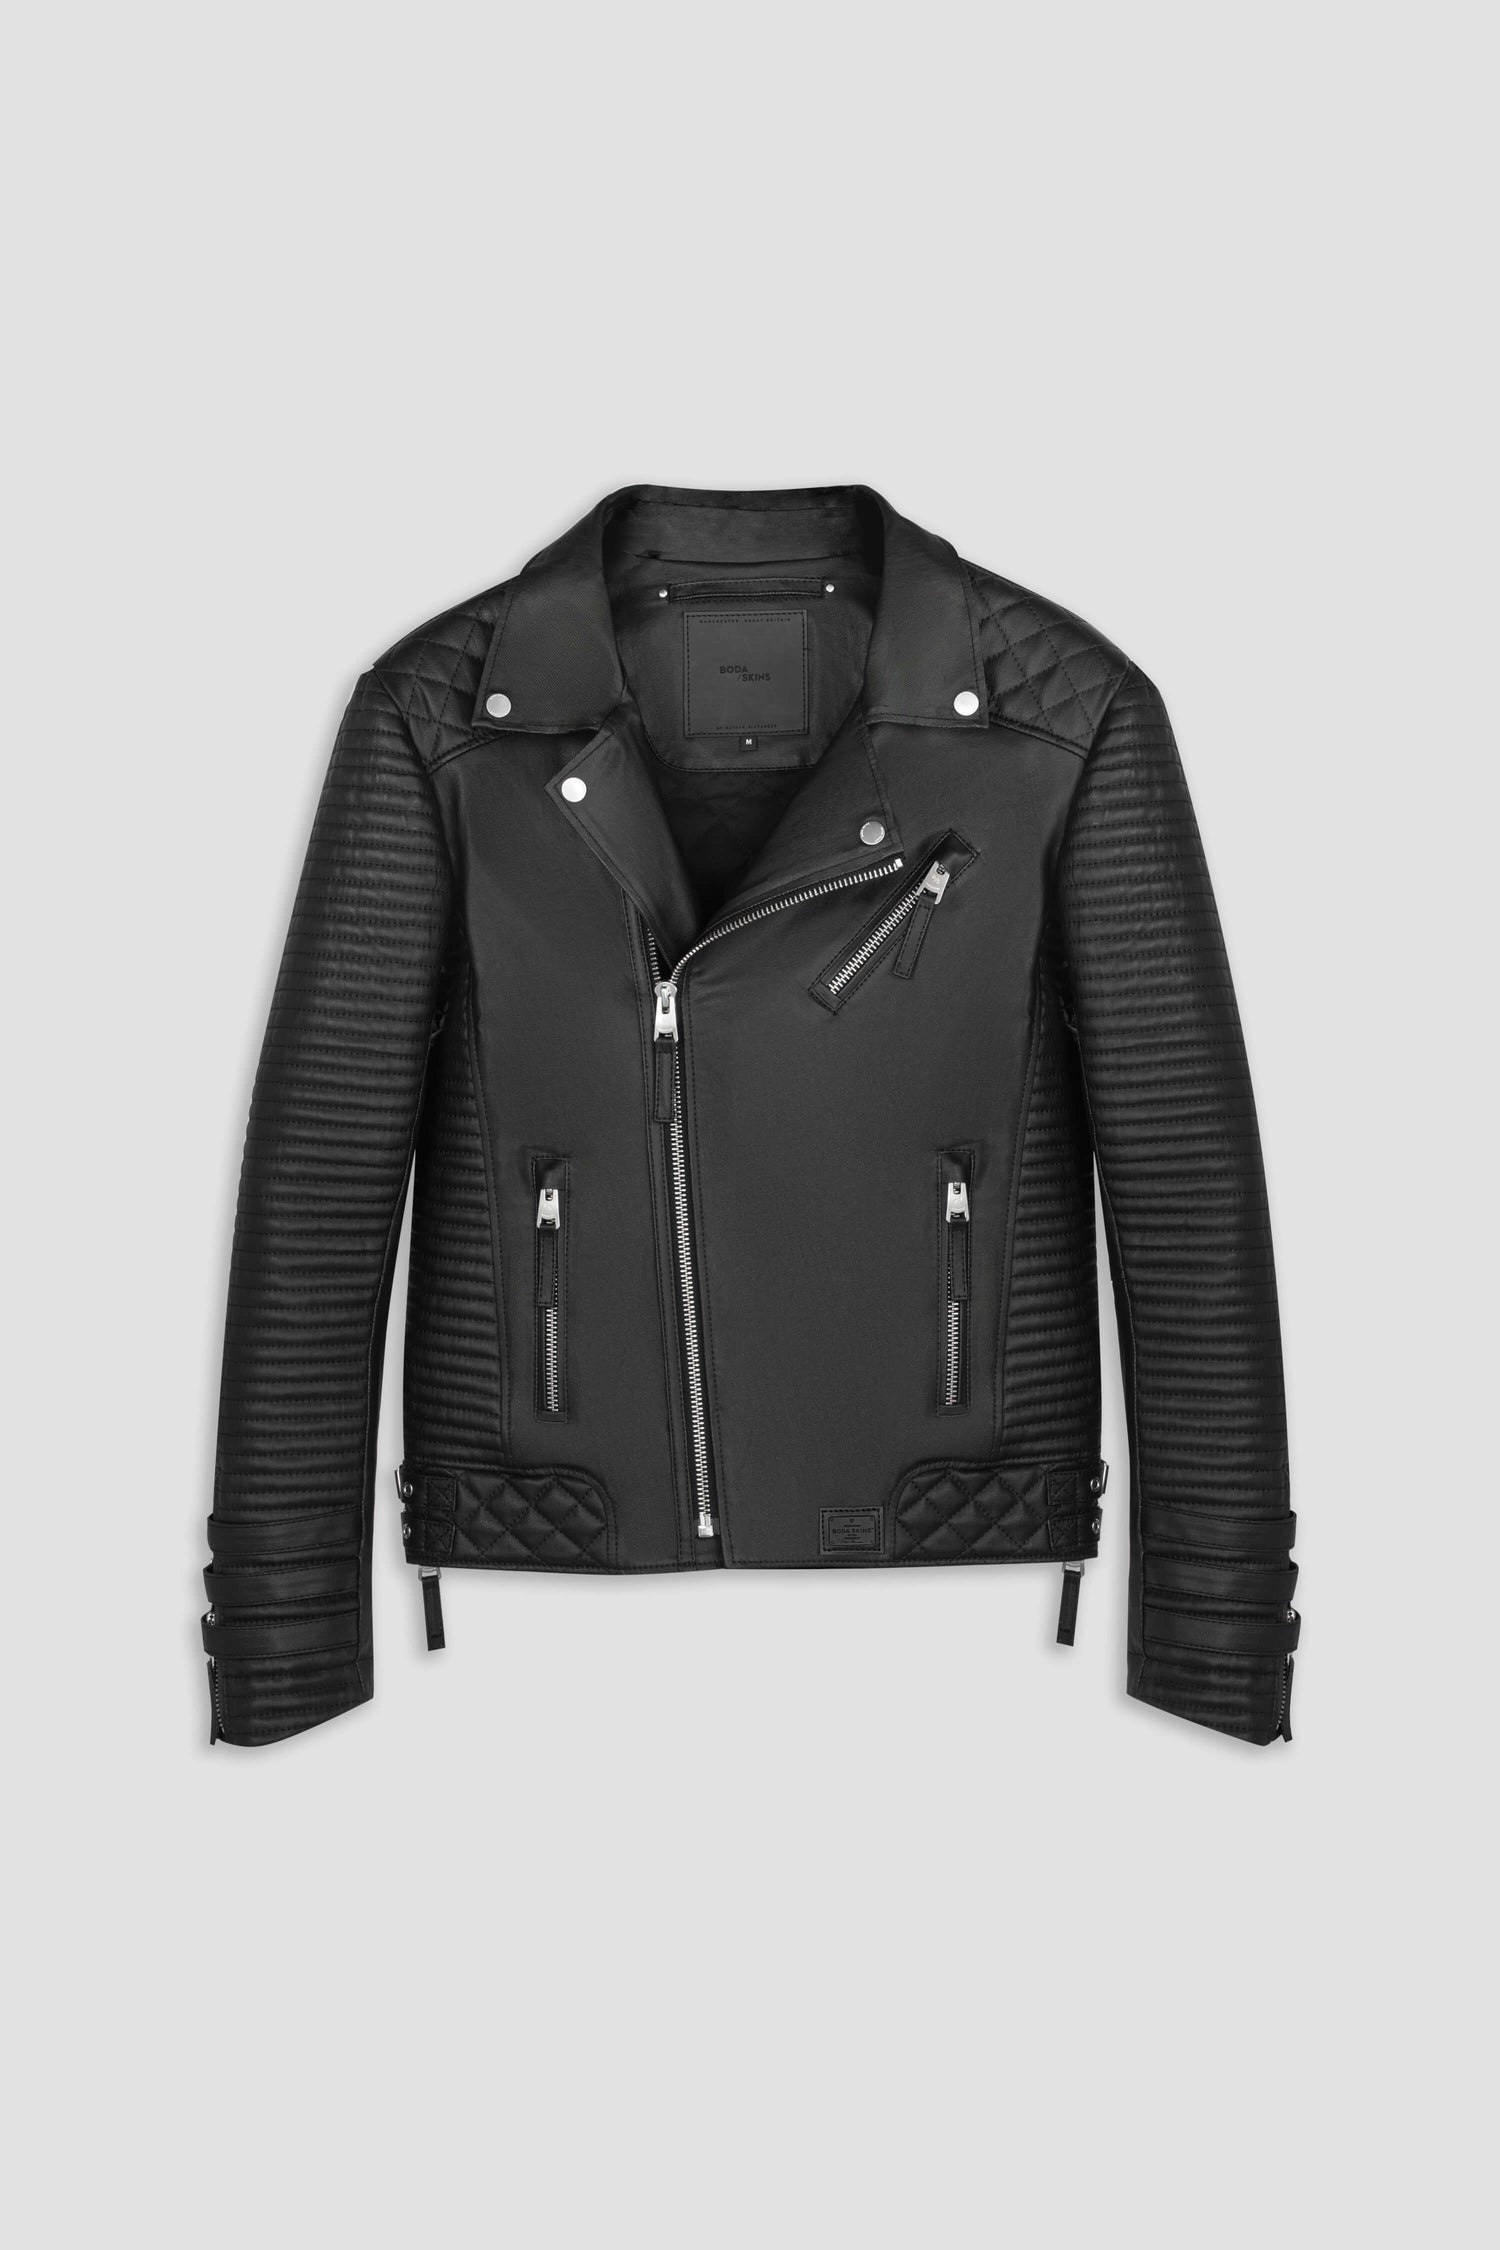 Men's Leather Biker Jackets - By Created Date: Newest to Oldest